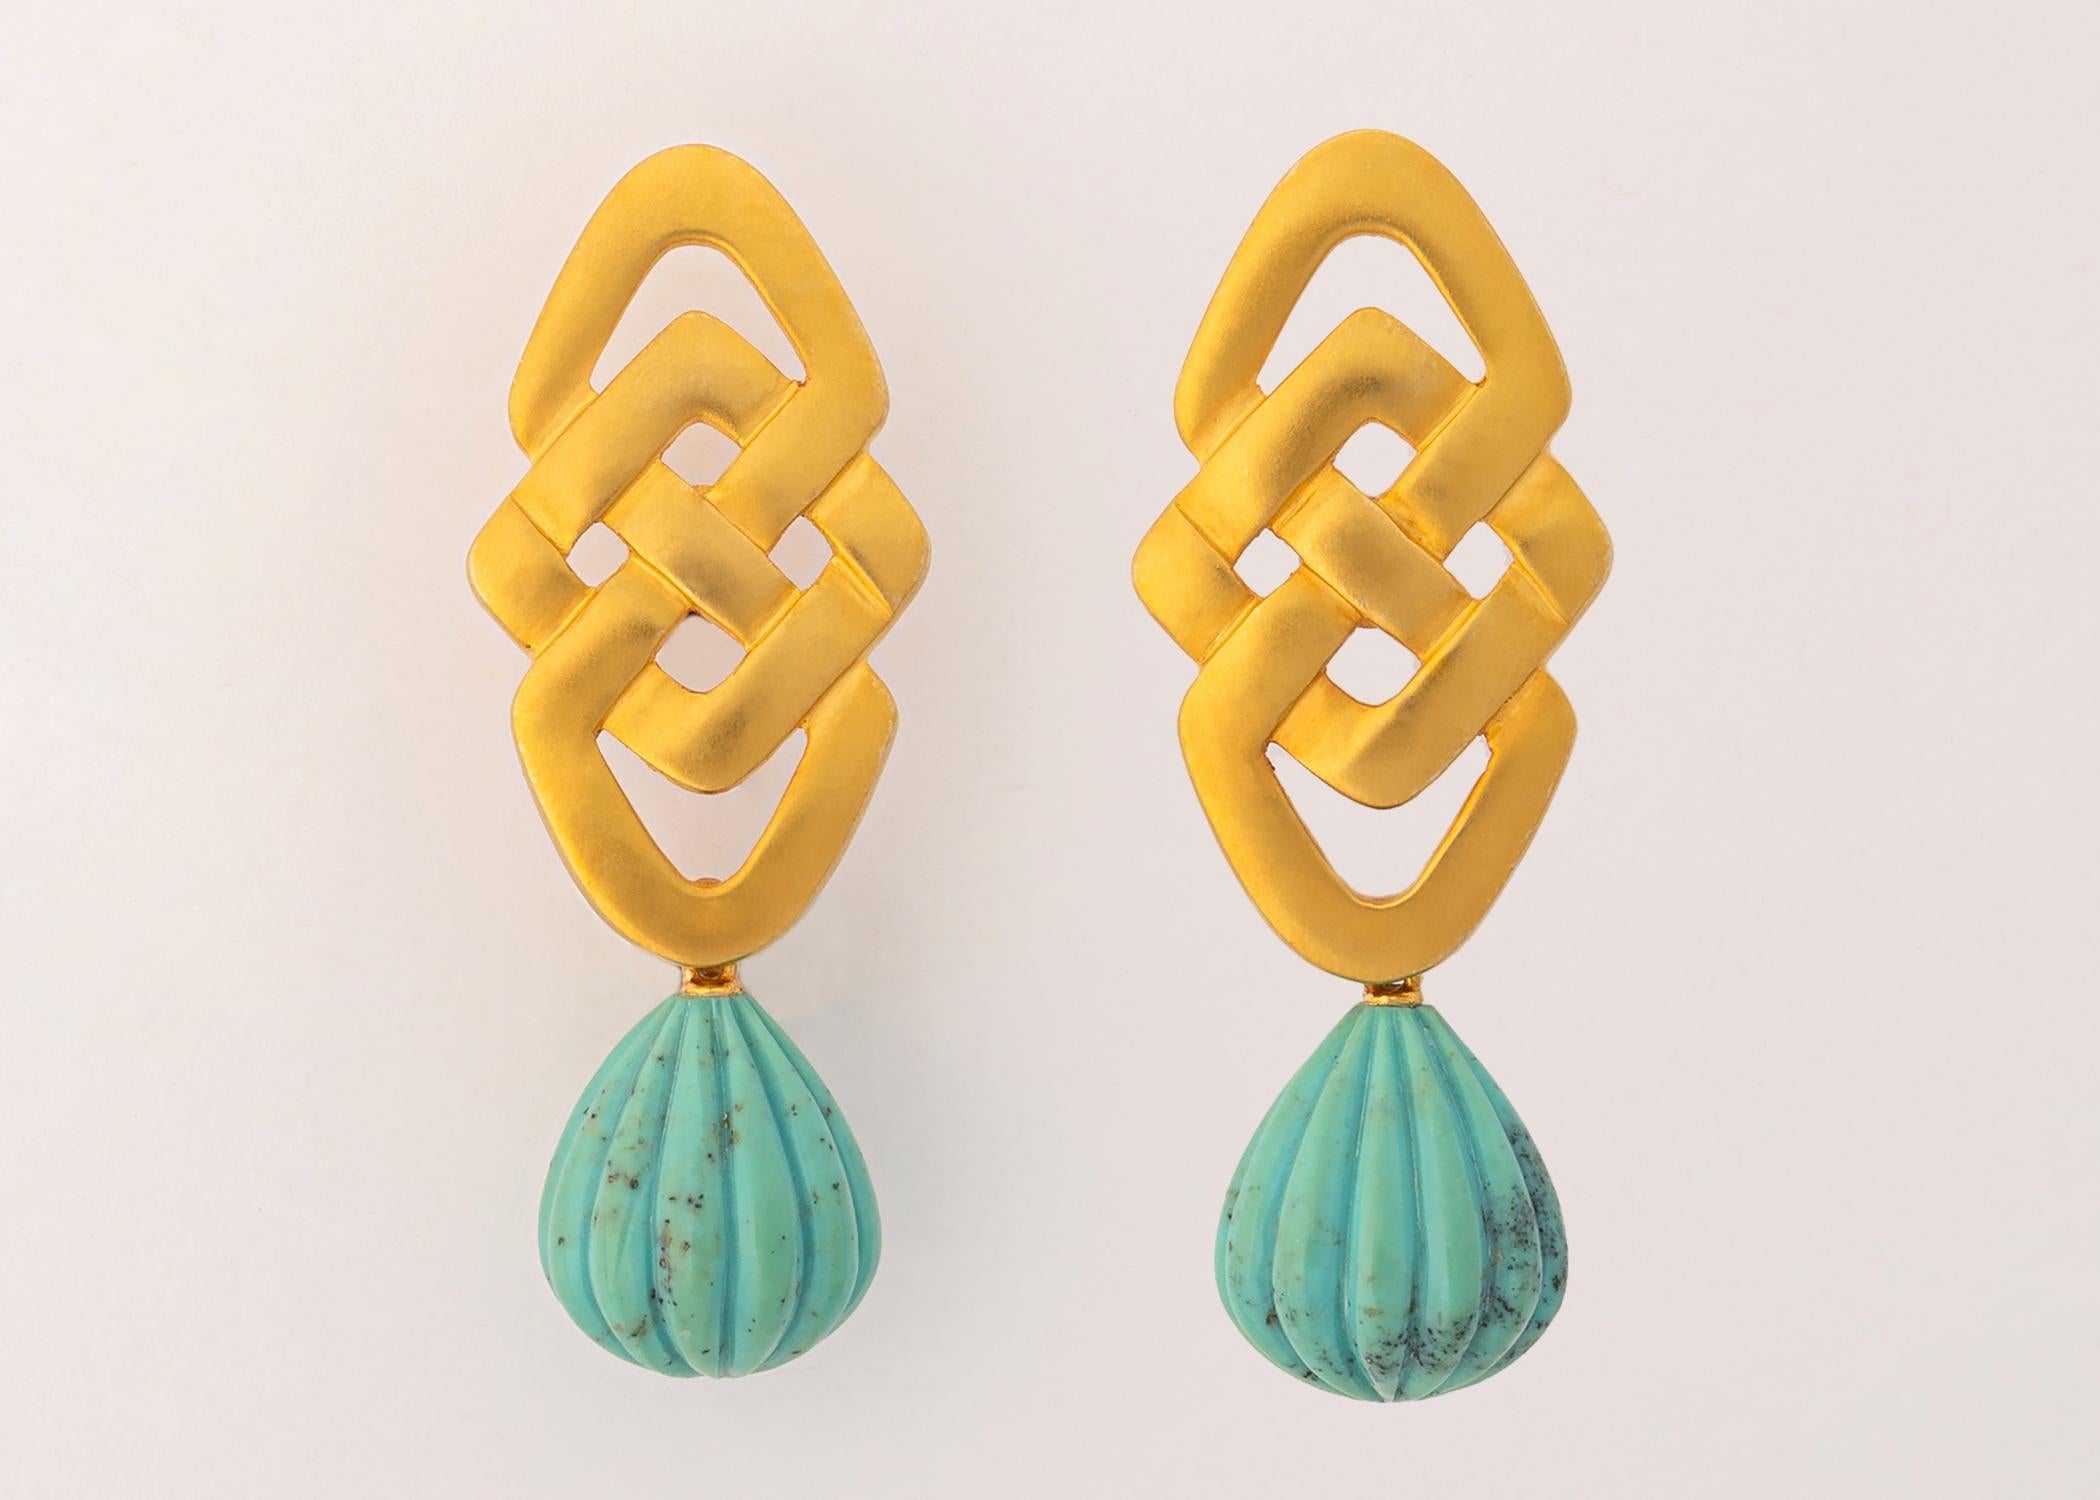 Contemporary Ilias Lalaounis Turquoise and Gold Drop Earrings.